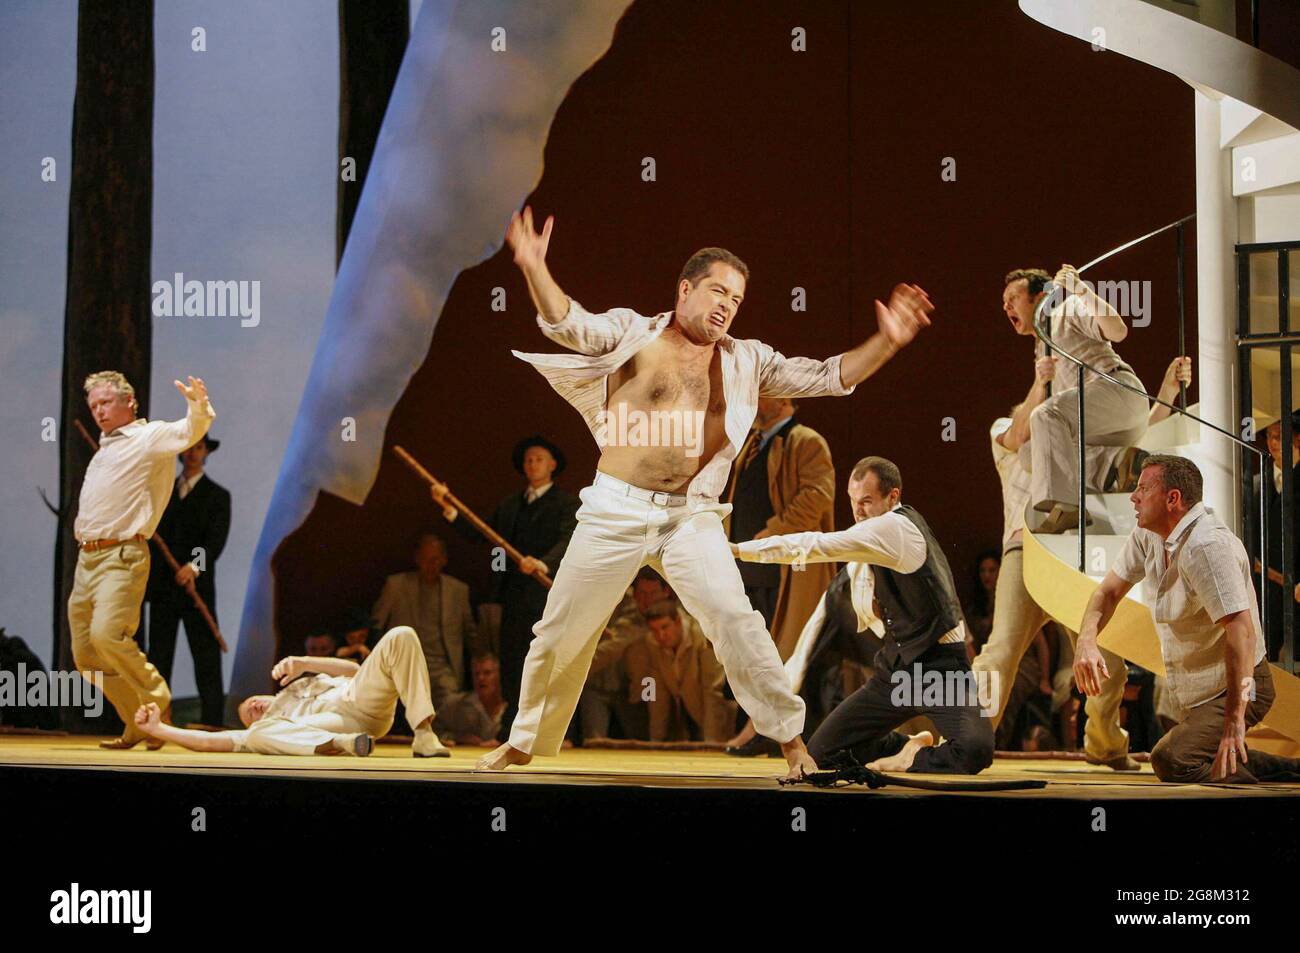 centre: Will Hartmann (Mark) in THE MIDSUMMER MARRIAGE by Michael Tippett at The Royal Opera, Covent Garden, London WC2  31/10/2005  conductor: Richard Hickox  design: Paul Brown  lighting: Wolfgang Gobbel  choreography: Ron Howell  director: Graham Vick Stock Photo